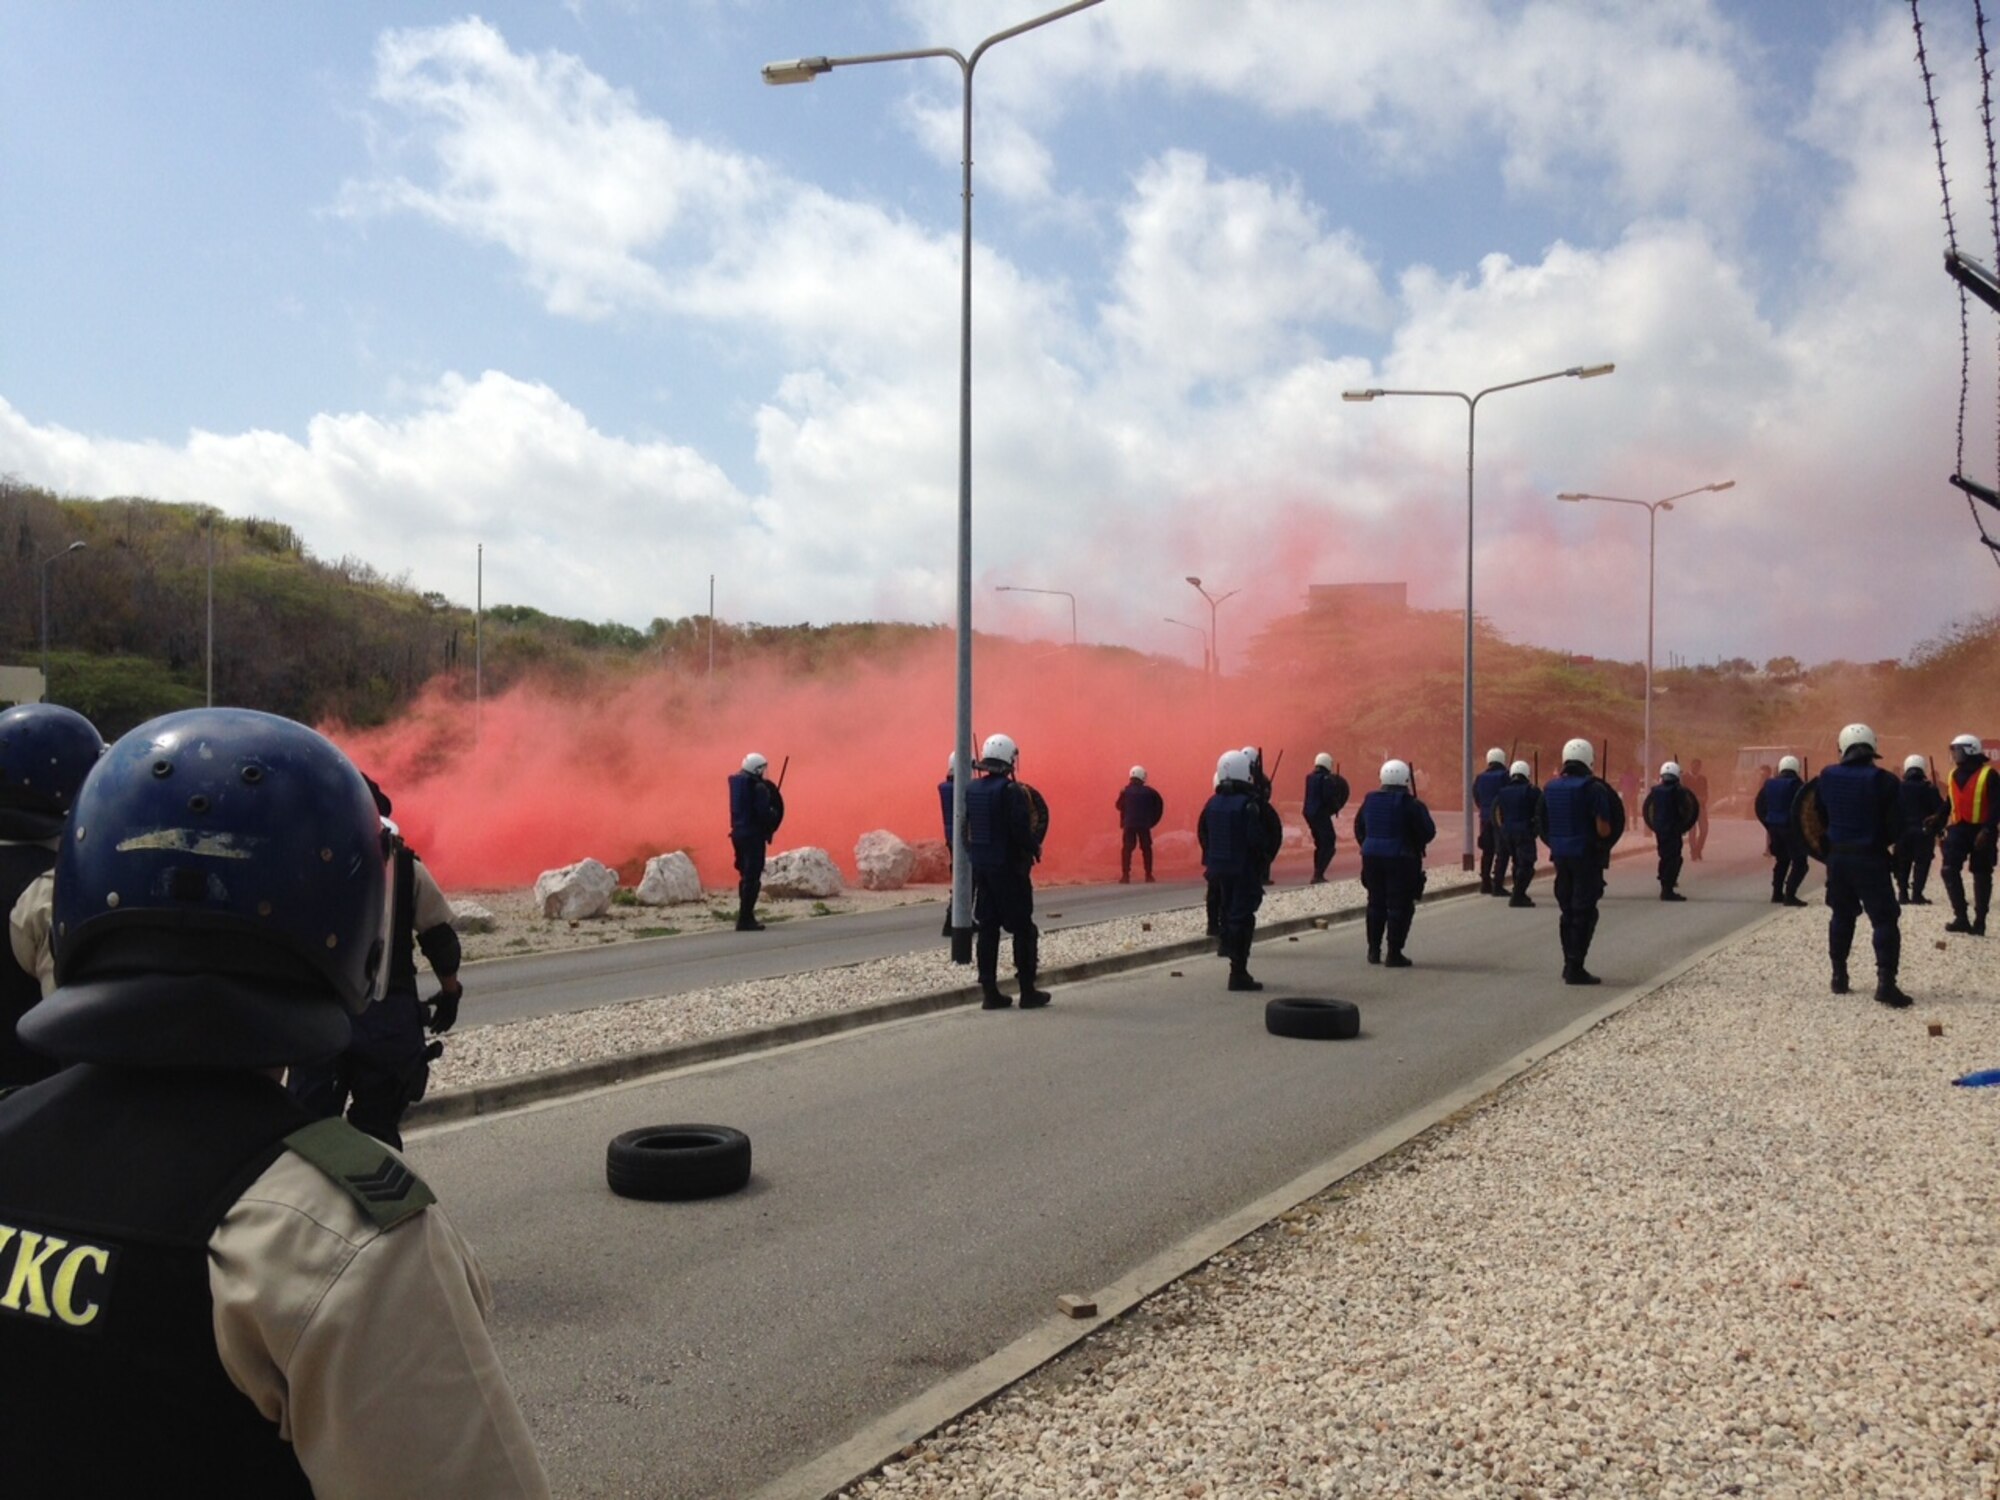 Members of the U.S. Forward Operation Location Curacao, Korps Police Curacao and the Vrijwilligers Korps Curacao, participated in a Joint Confrontation Management Riot Exercise at the U.S. Forward Operation Location Curacao, Sept. 27, 2015.  This exercise brought three law enforcement agencies together in an effort to forge strong partnerships in protecting assets at the FOL and within the community.  The training exercise was approximately three hours long and resulted in successful joint riot exercise training for all parties involved.  This was the first exercise where all three agencies collaborated and worked together as a team to achieve all the training objectives.  All the agencies considered the exercise to be successful in preparing themselves for any type of future riot control measures that may occur. (Courtesy photo/Released) 